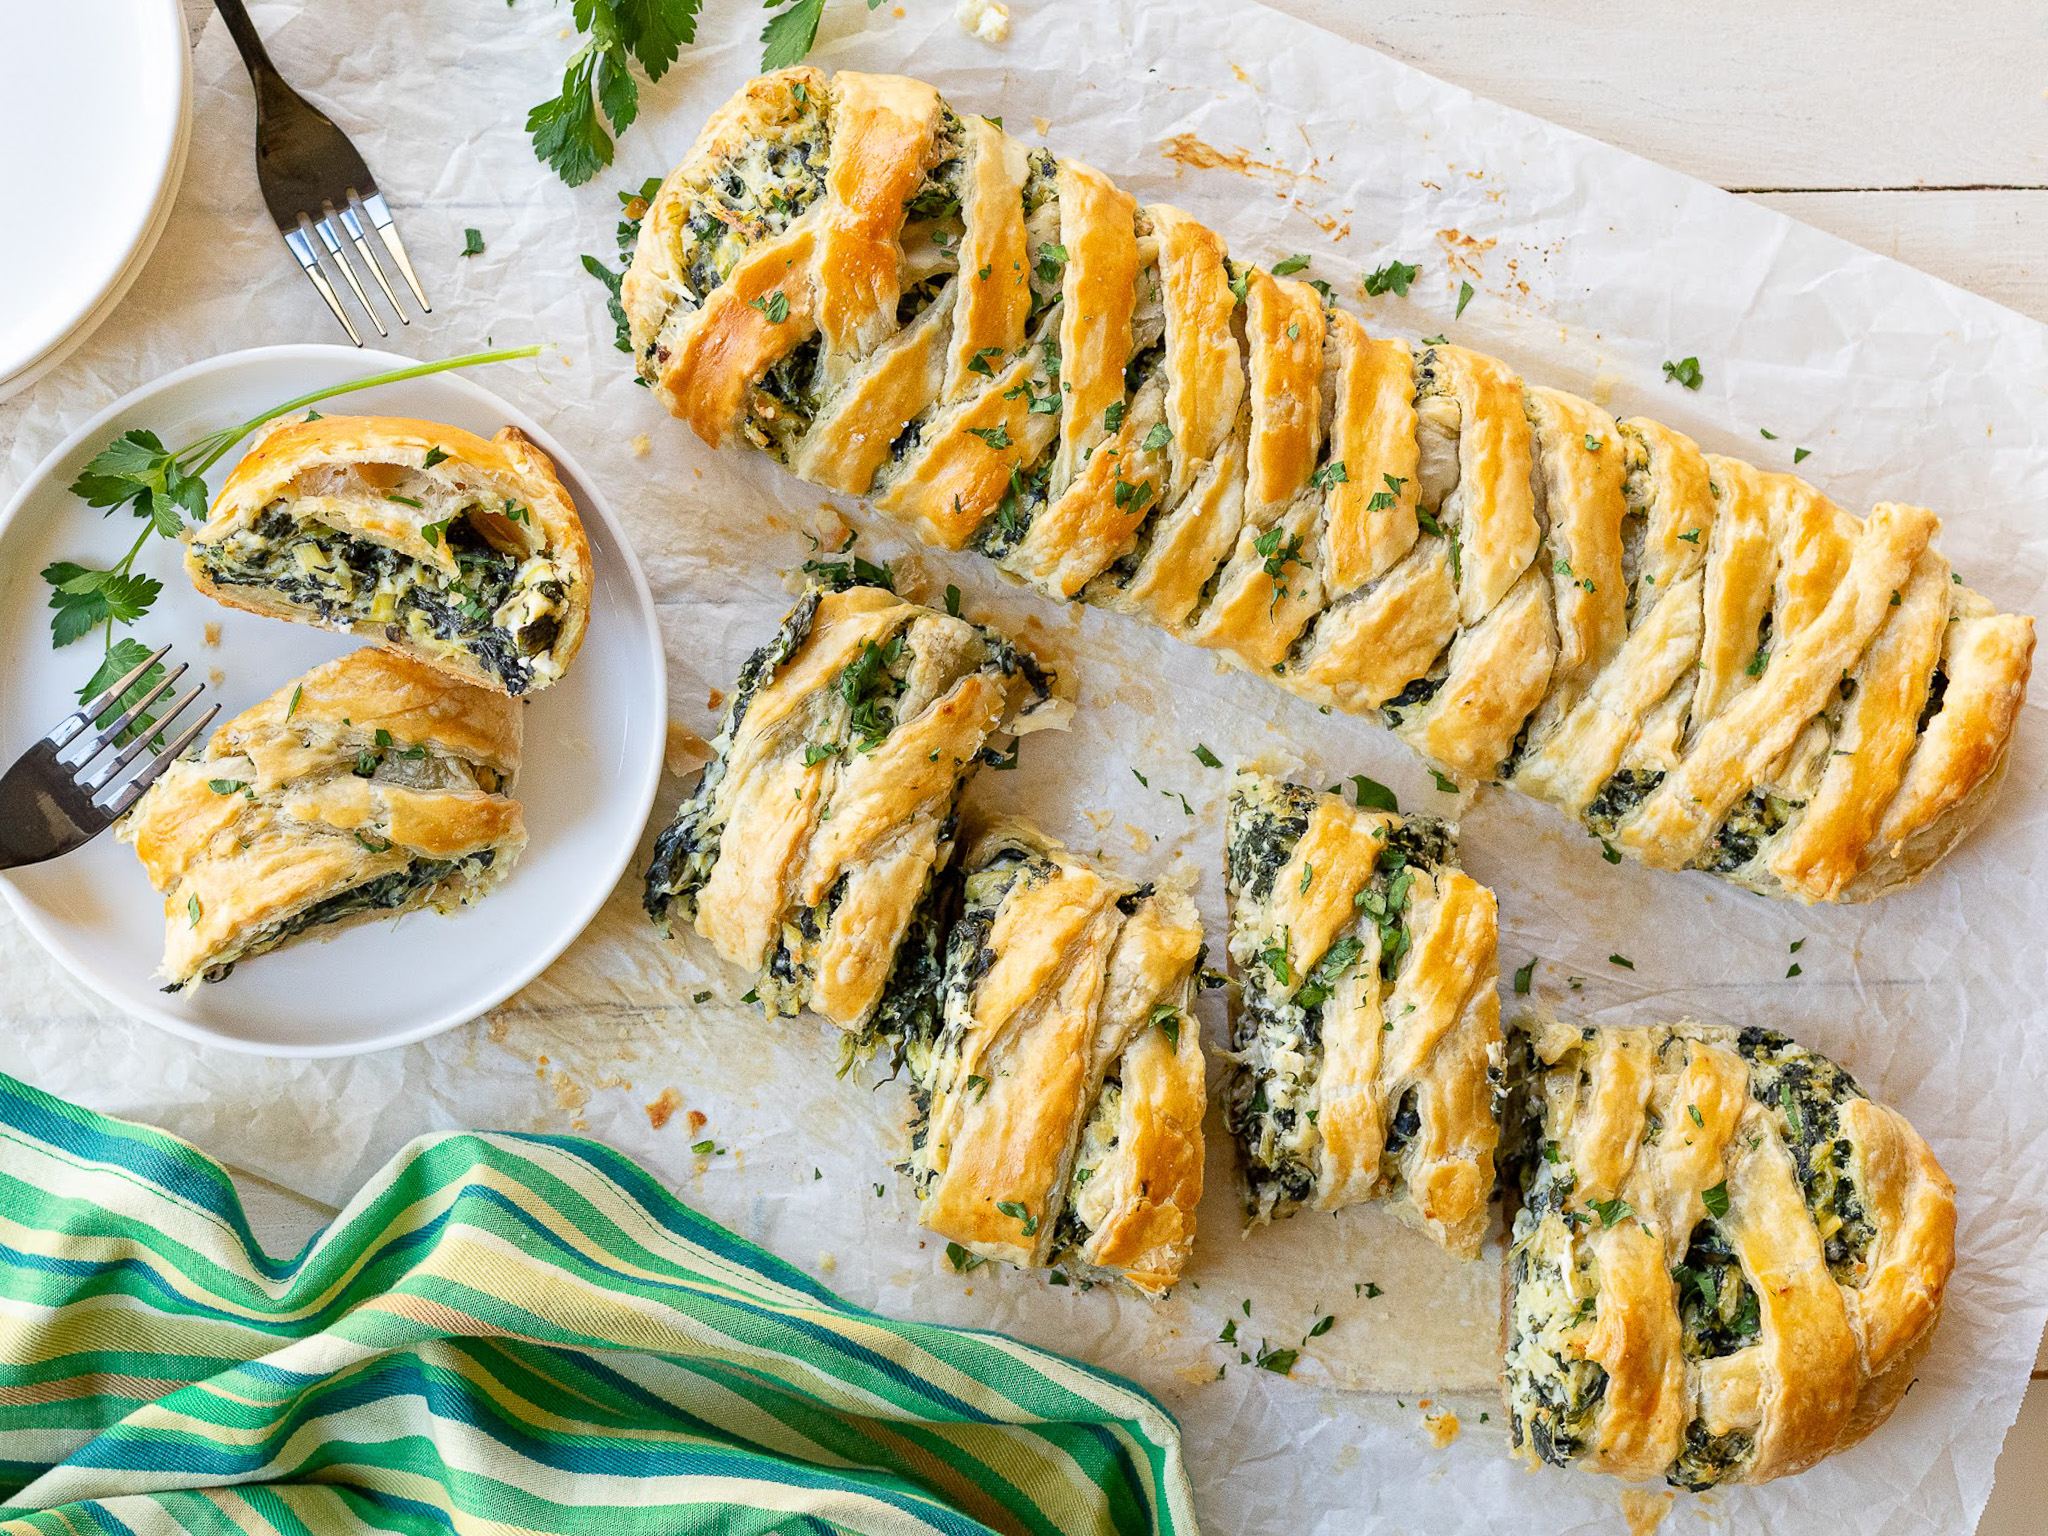 Serve Up A Delicious Meal In A Flash With Gary’s QuickSteak® – Try My Chicken Spinach & Artichoke Braid